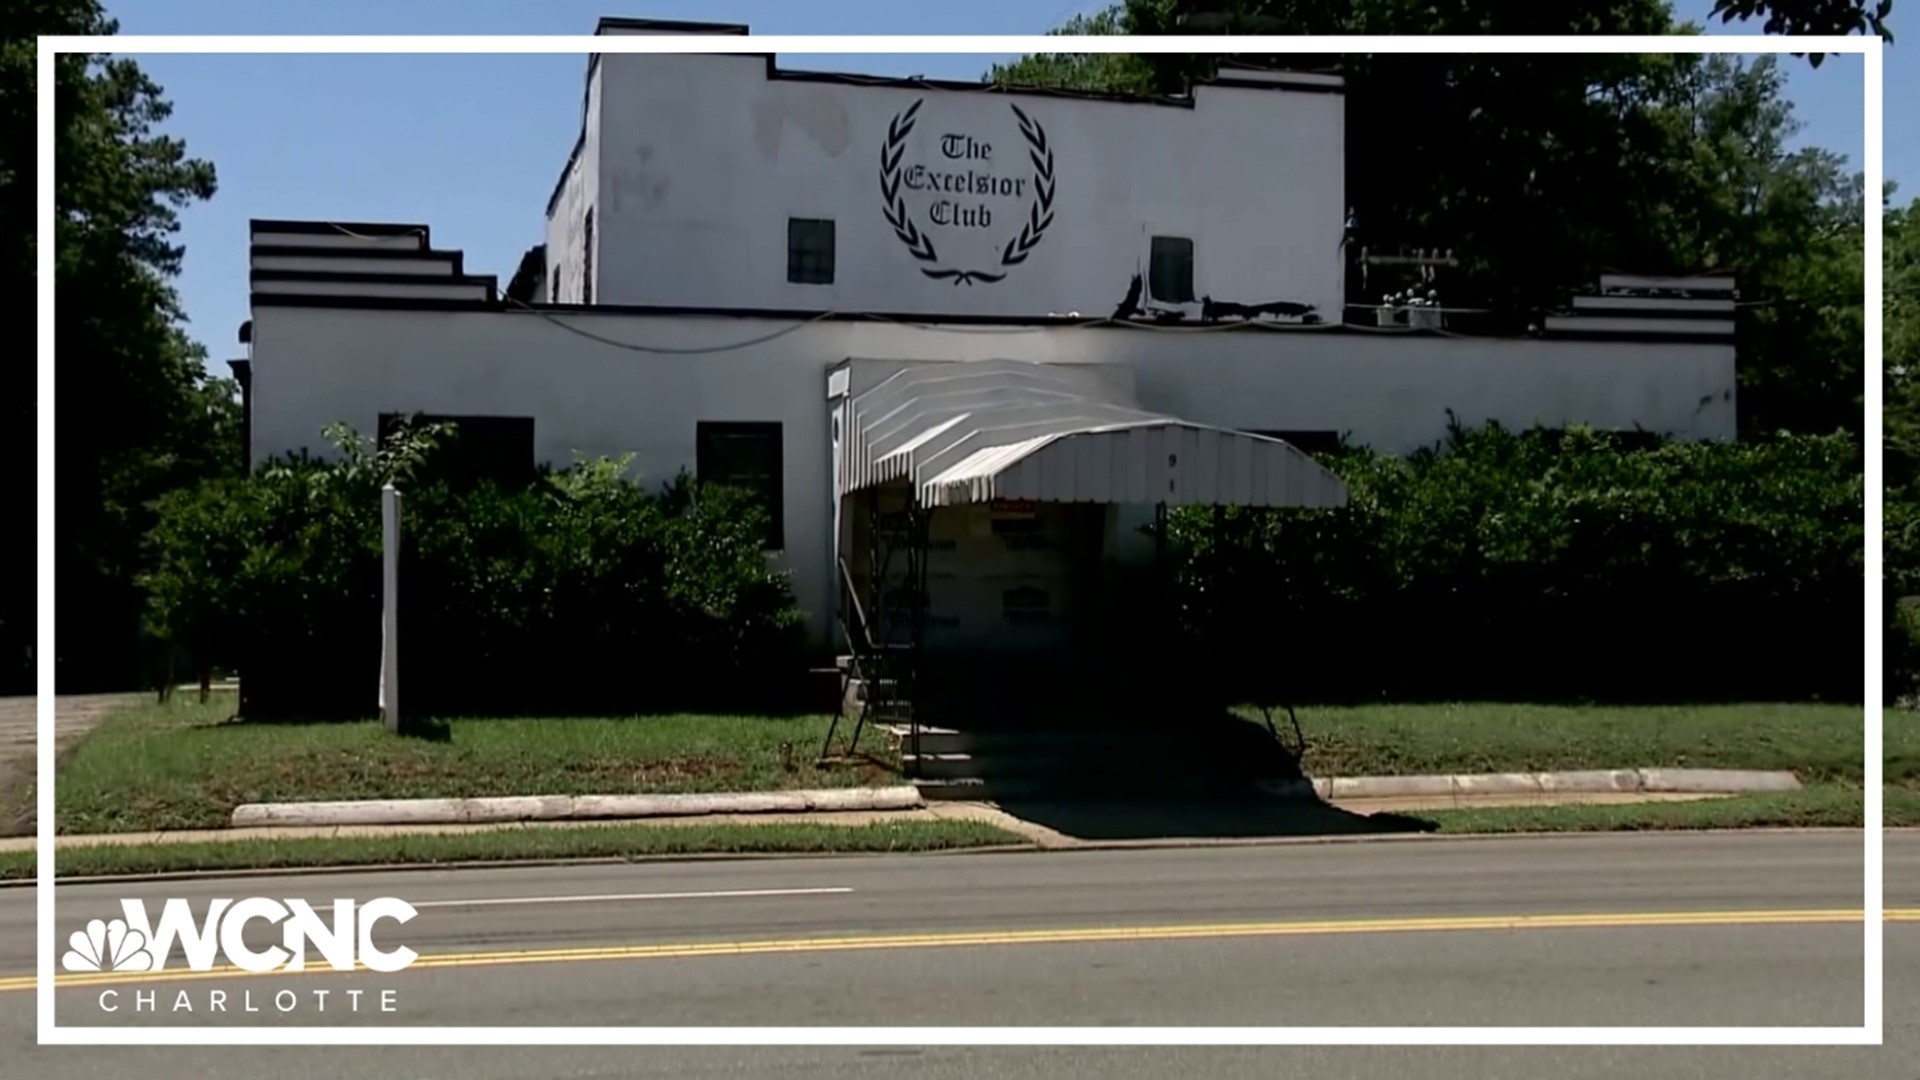 WCNC’s Jane Monreal shows us the history behind what was once the social scene for Charlotte’s Black community, The Excelsior Club